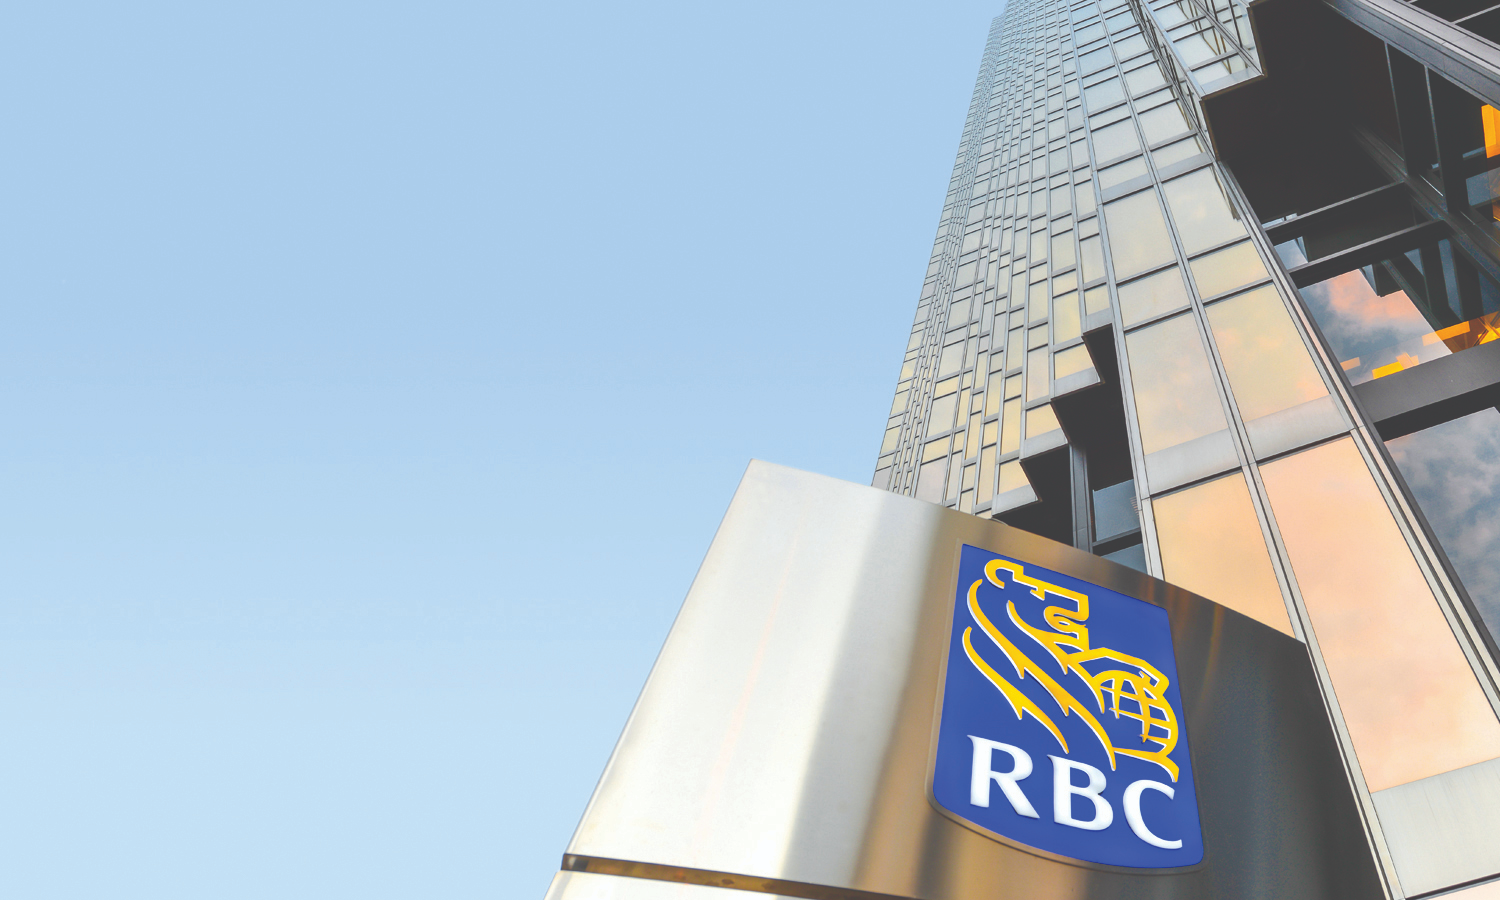 RBC tower in Toronto with logo.